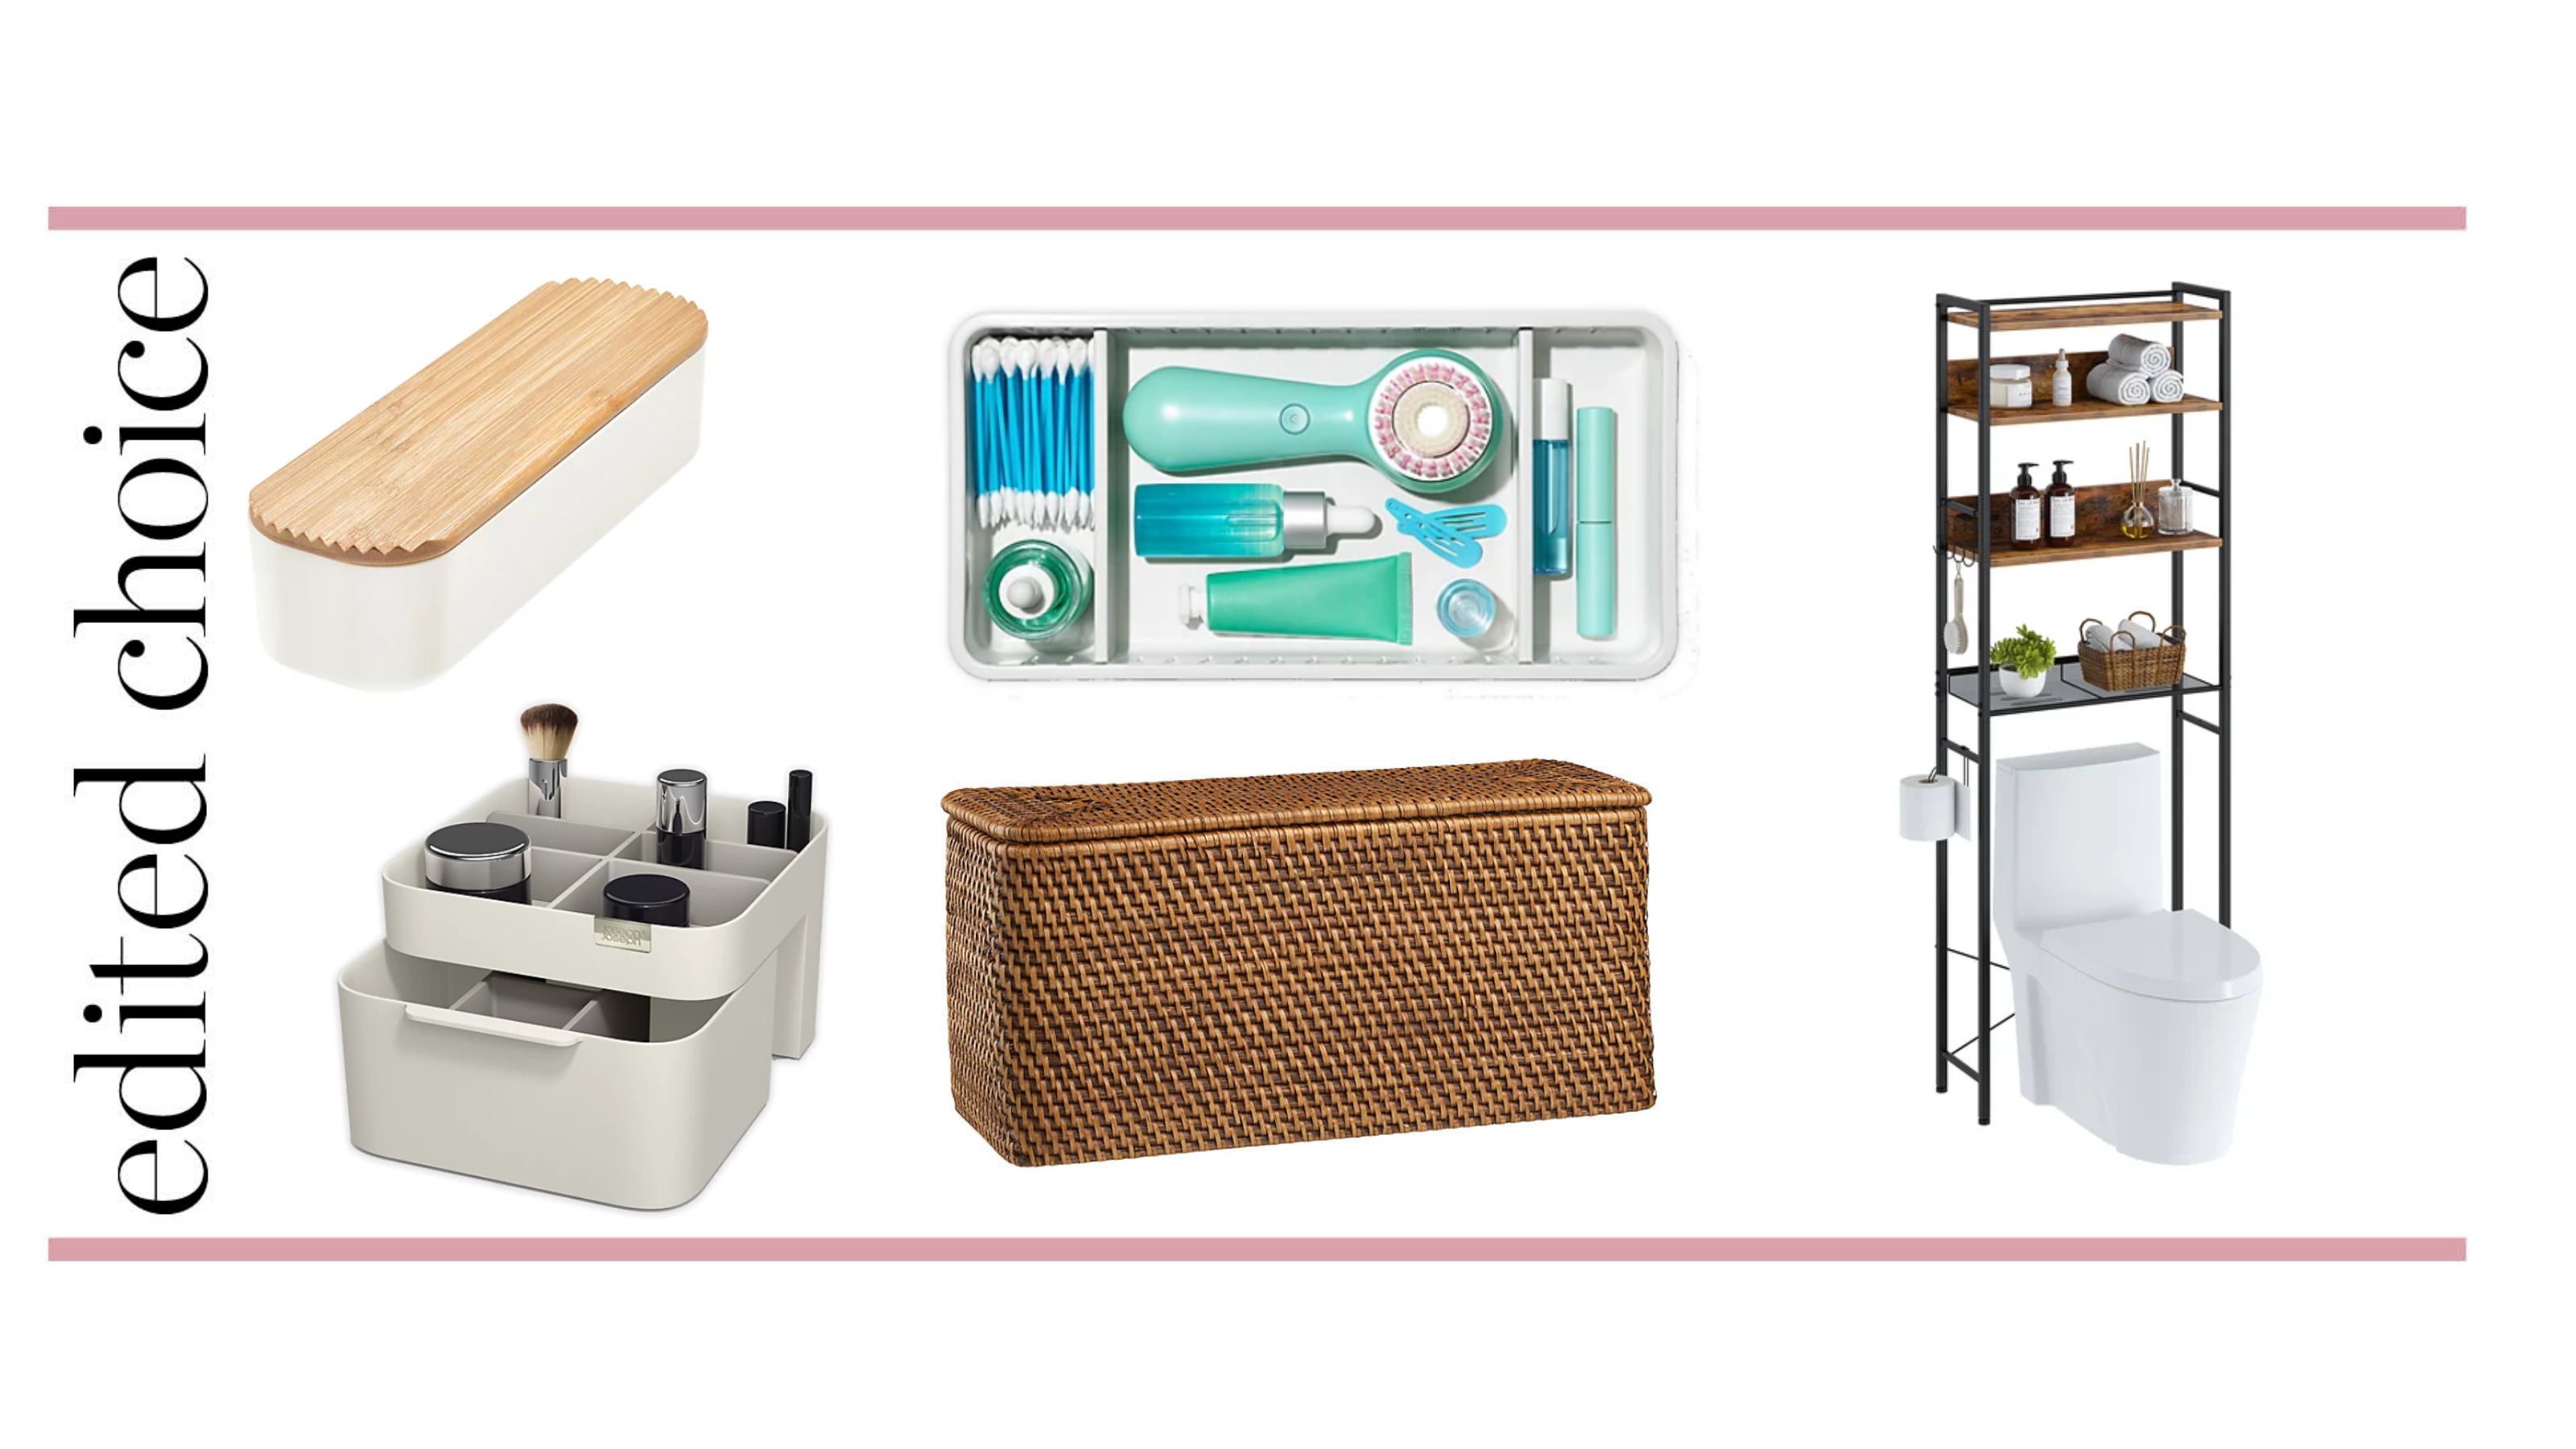 18 of the best bathroom organizers to maximize storage space